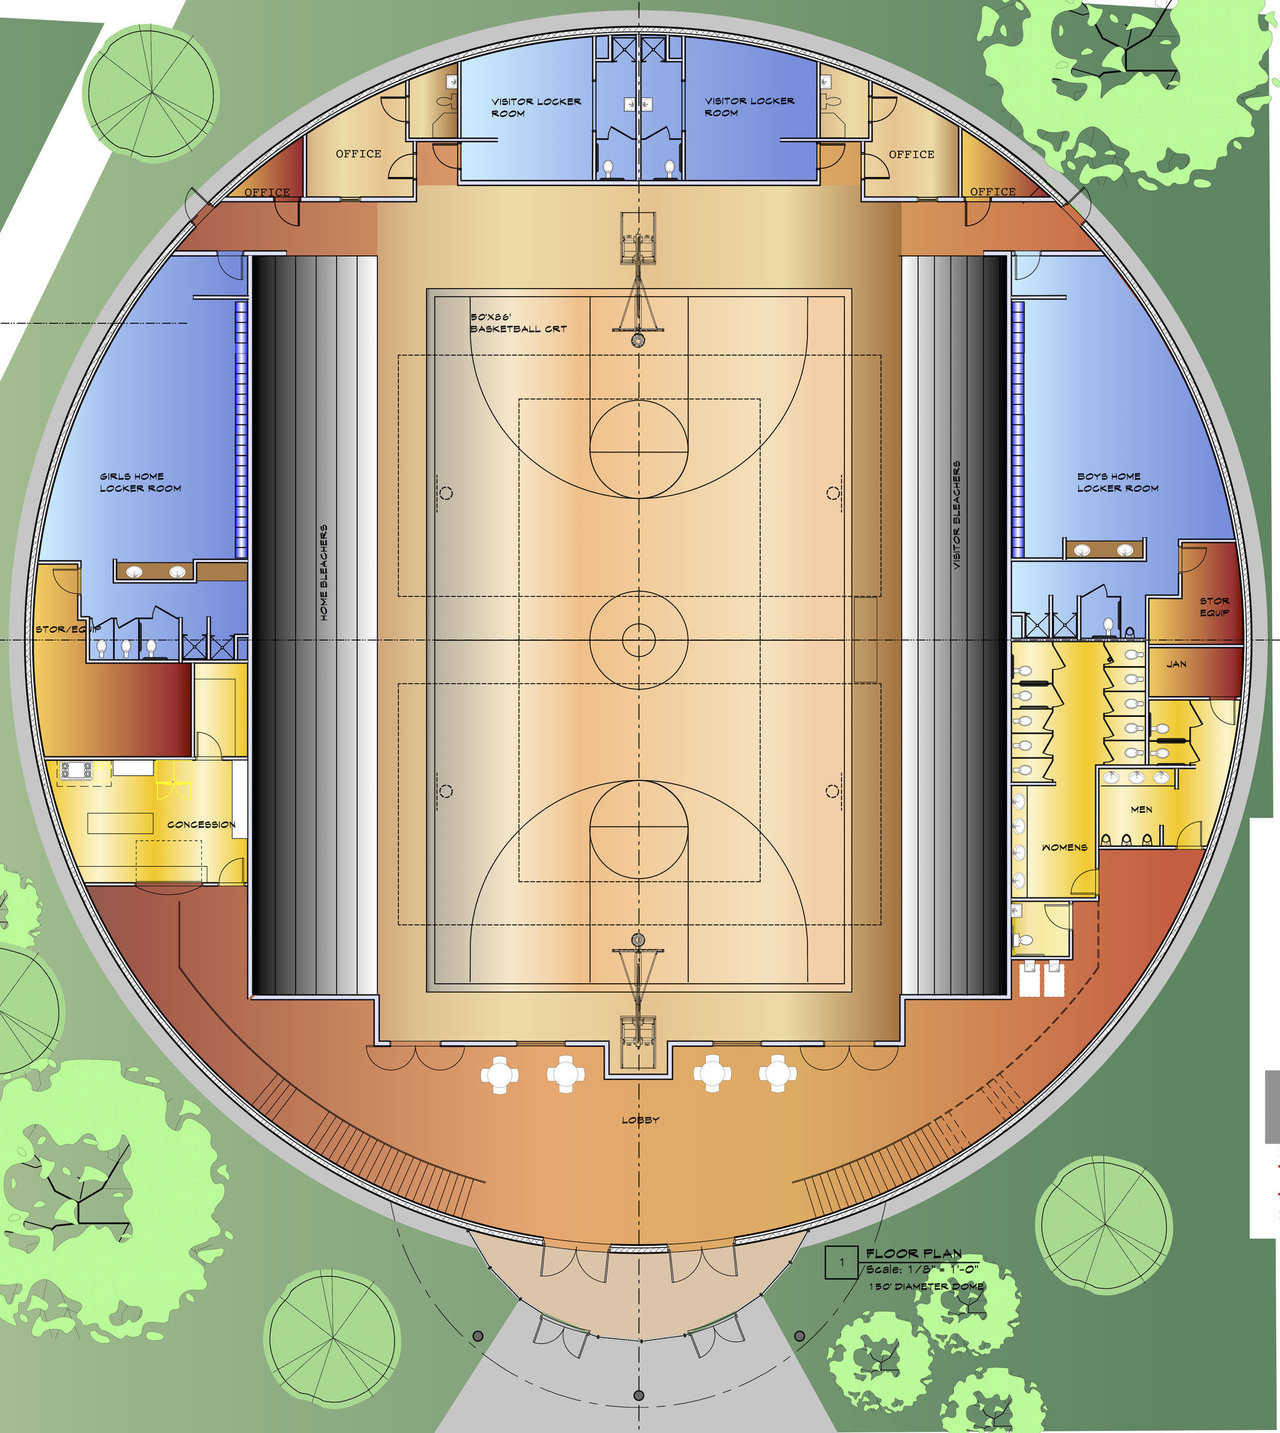 Plan for the new gymnasium includes seating for 1,200. The gym is expected to hold 3,000 during an emergency.